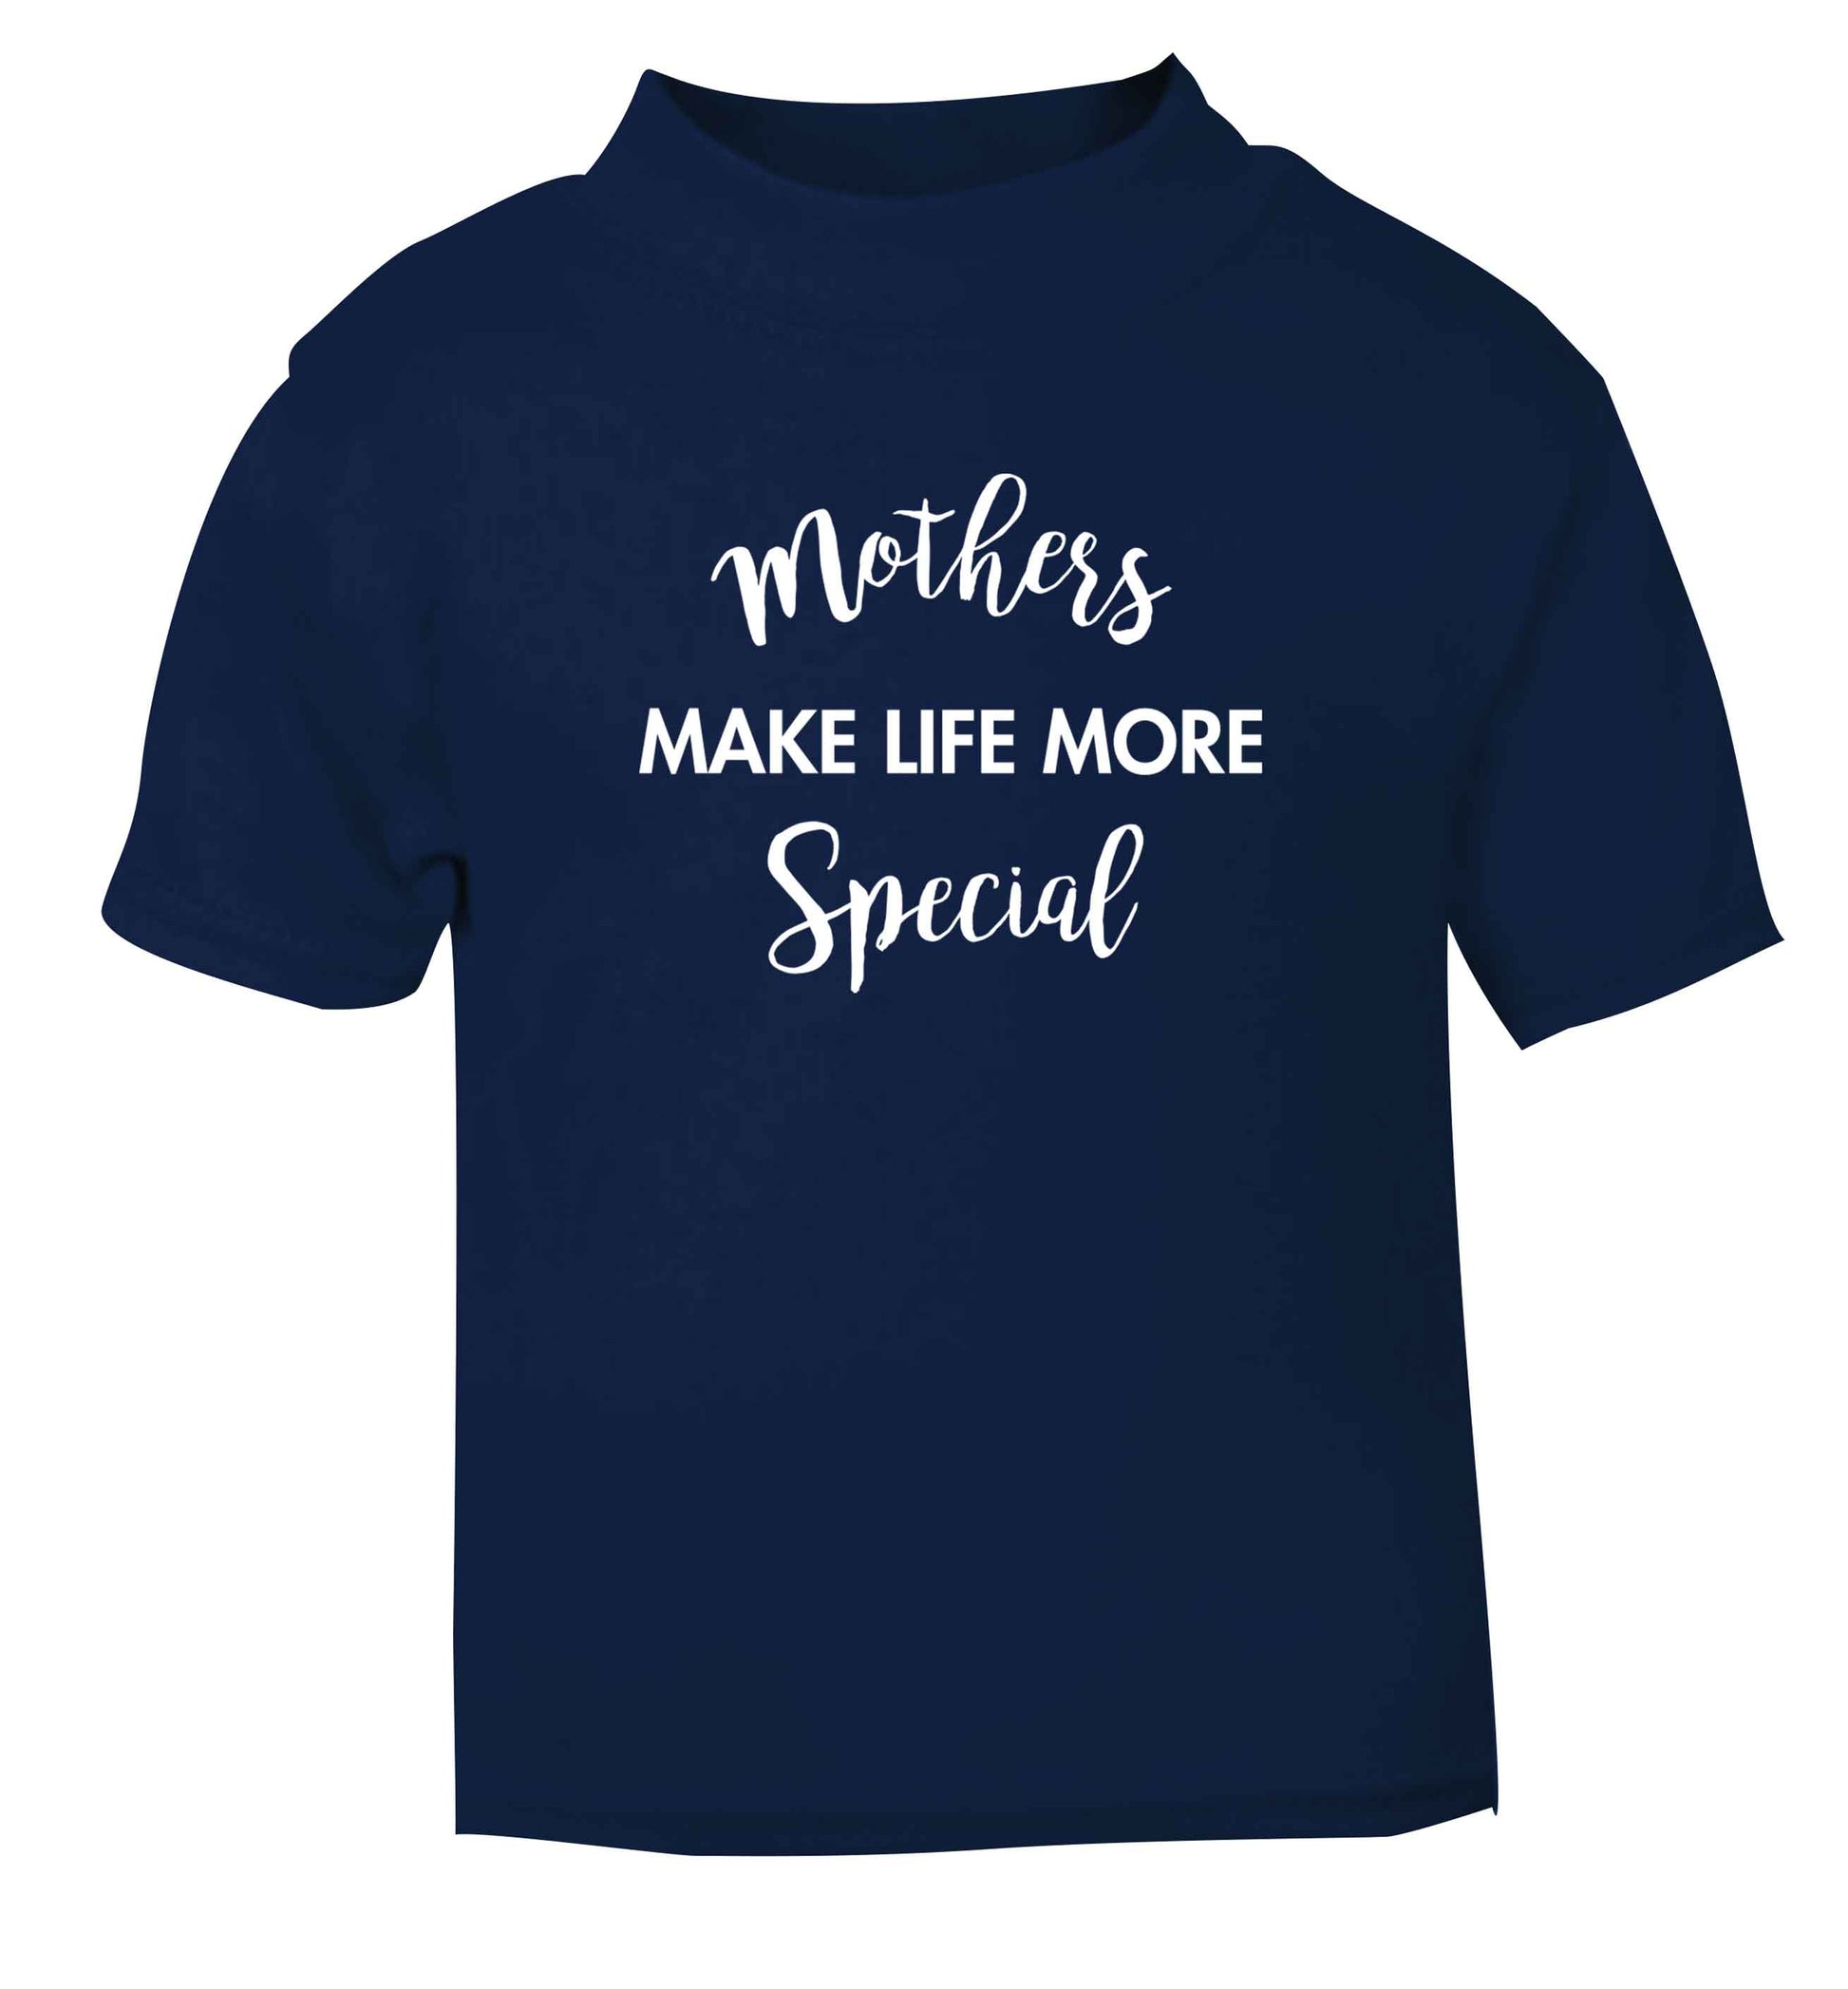 Mother's make life more special navy baby toddler Tshirt 2 Years